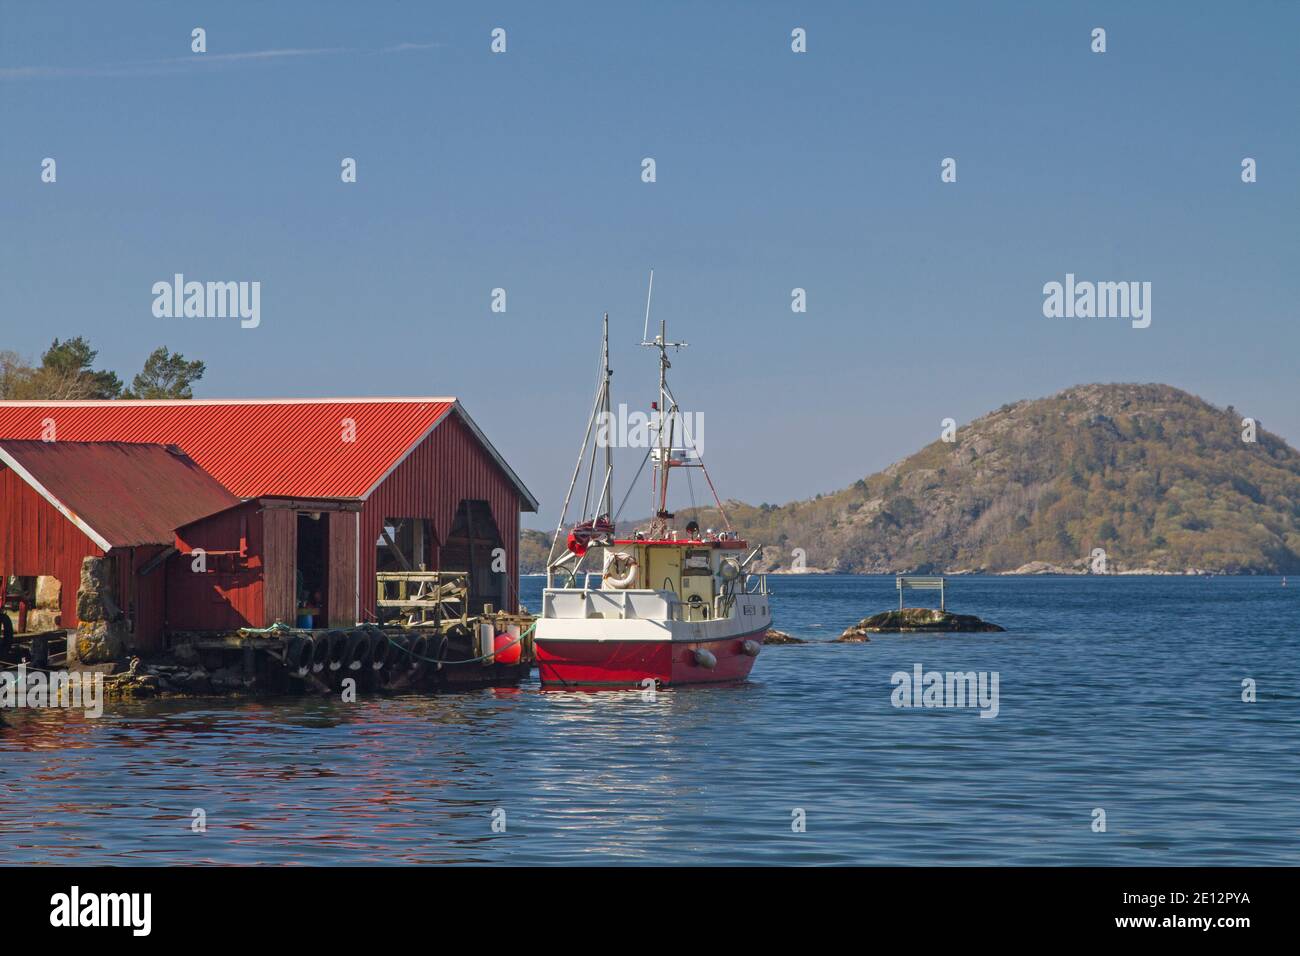 Boat Huts And Fishing Boats In Bjornevag An Idyllic Quiet Fishing Village On Spindsfjorden Stock Photo